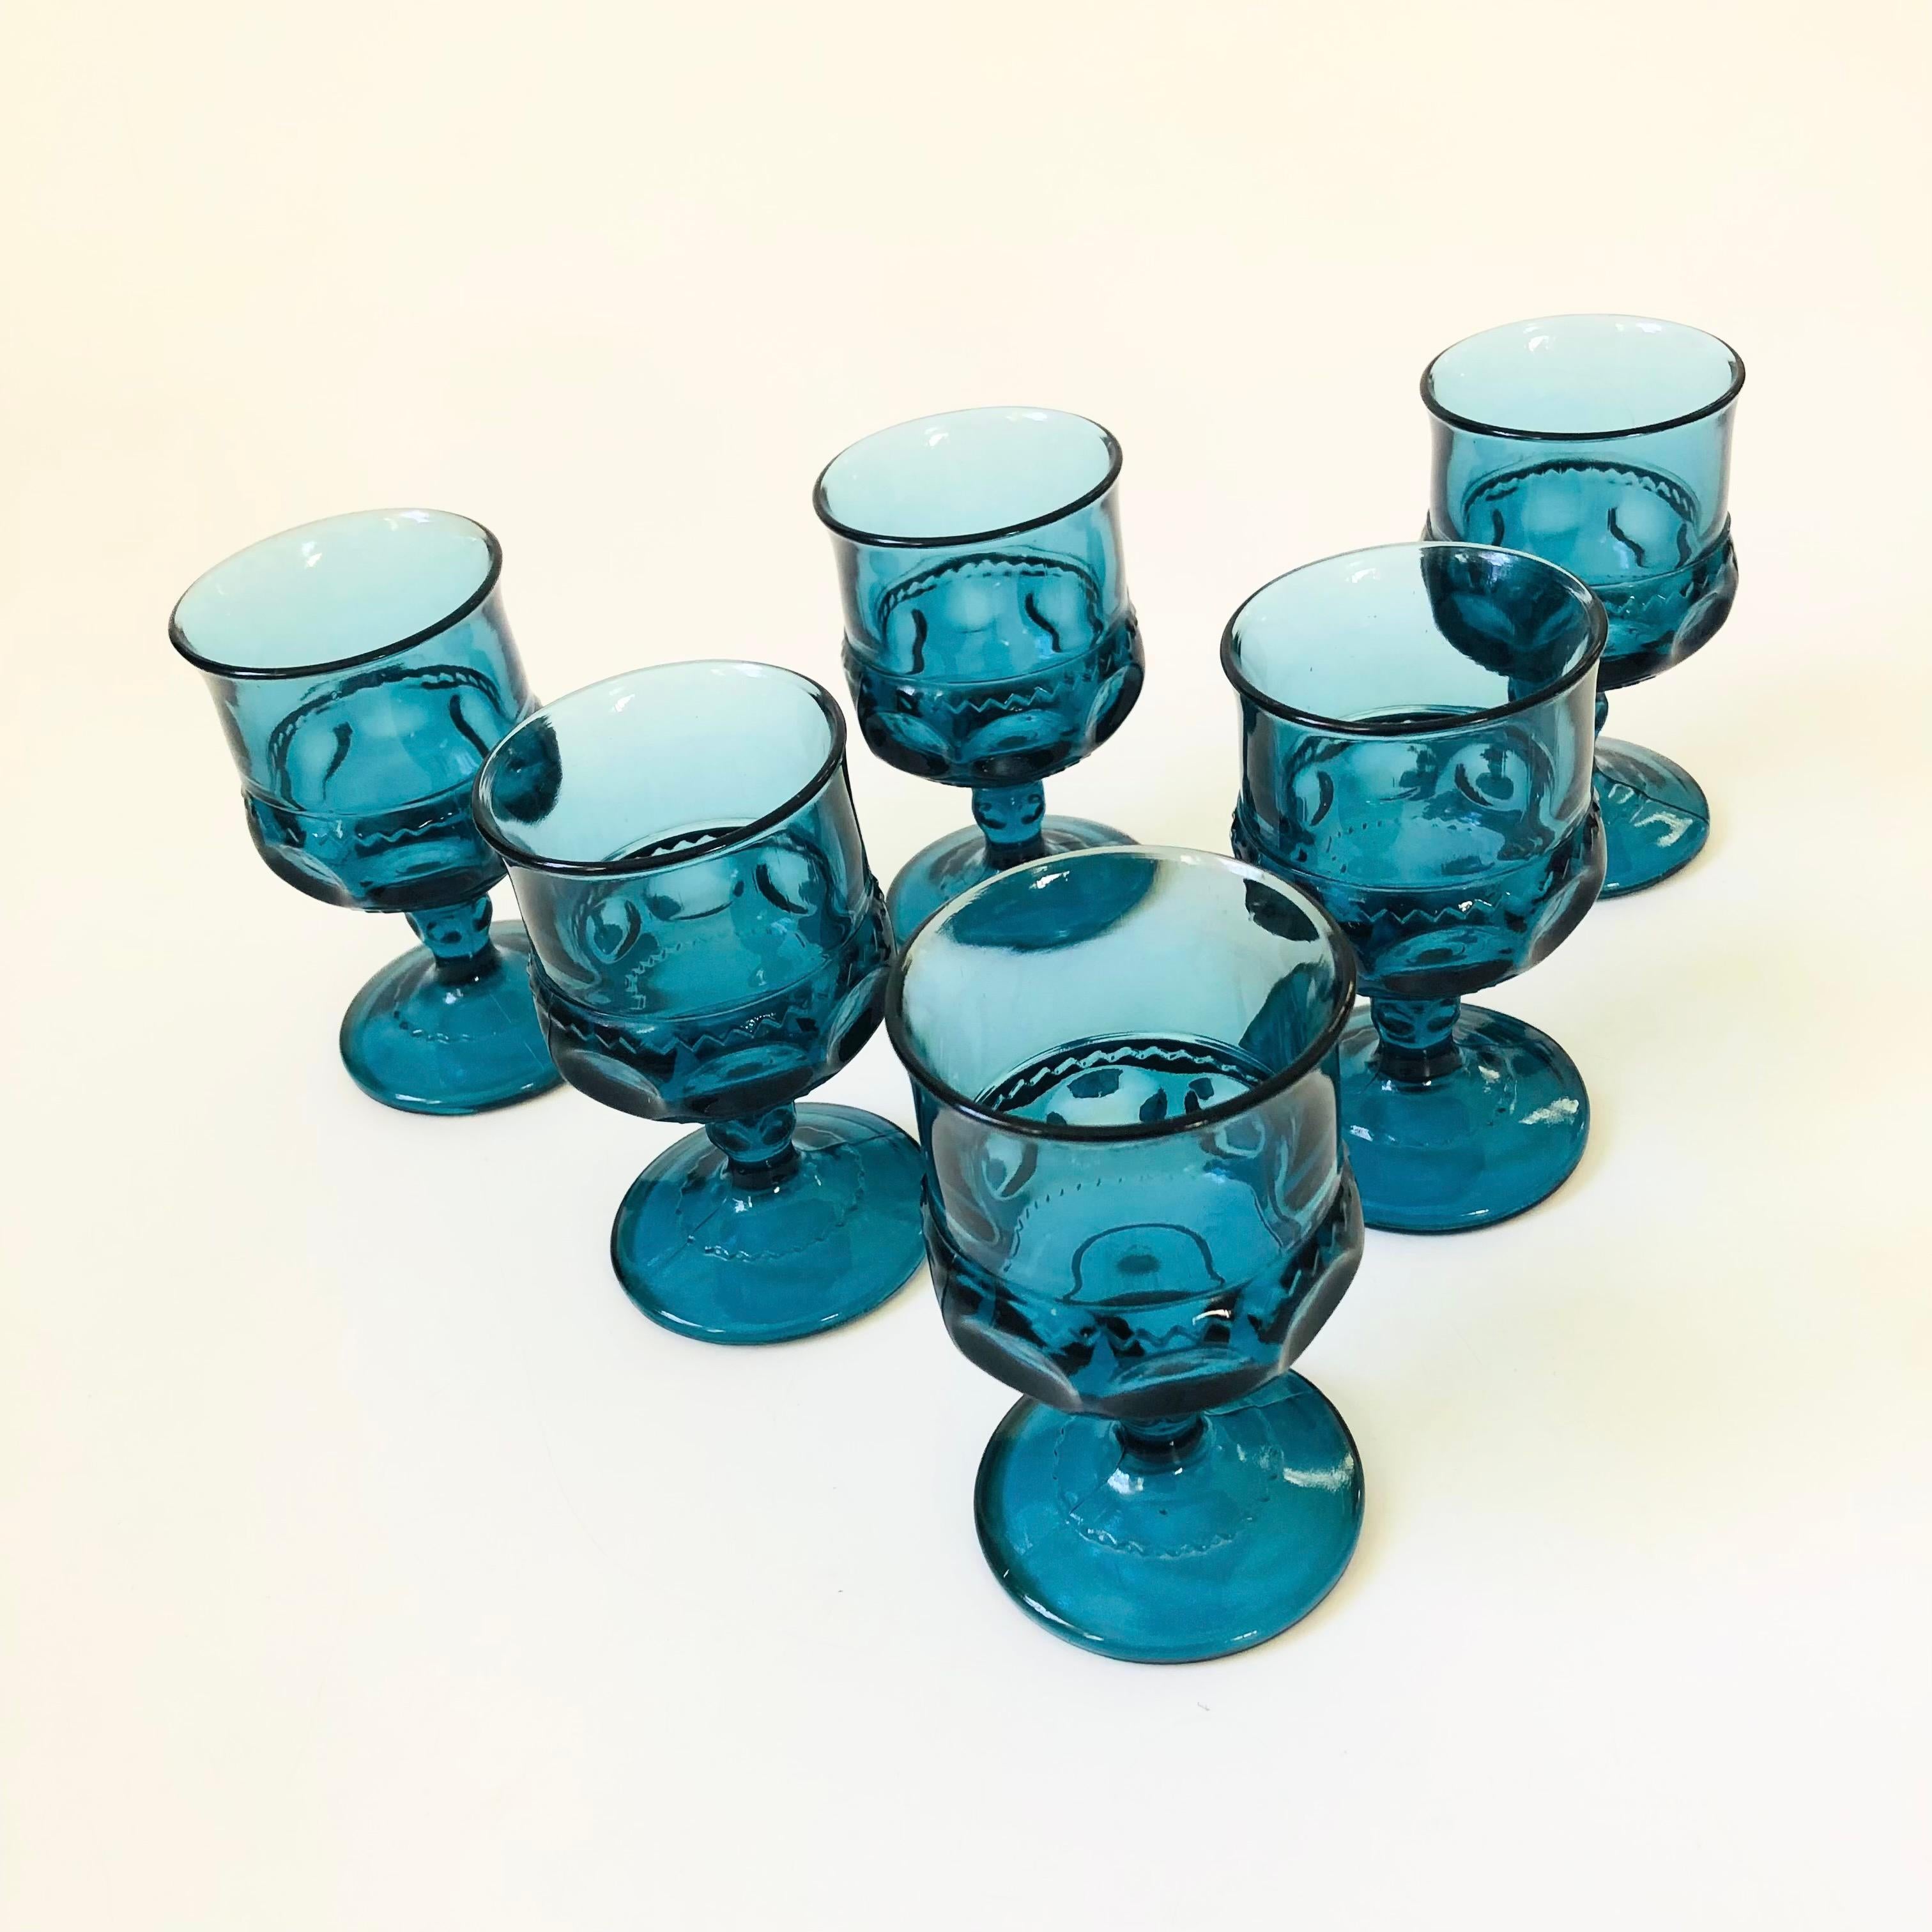 A set of 6 vintage goblets in an ornate design in blue colored glass. Made in the King's Crown pattern by Indiana Glass. Perfect for a small glass of wine or champagne.

